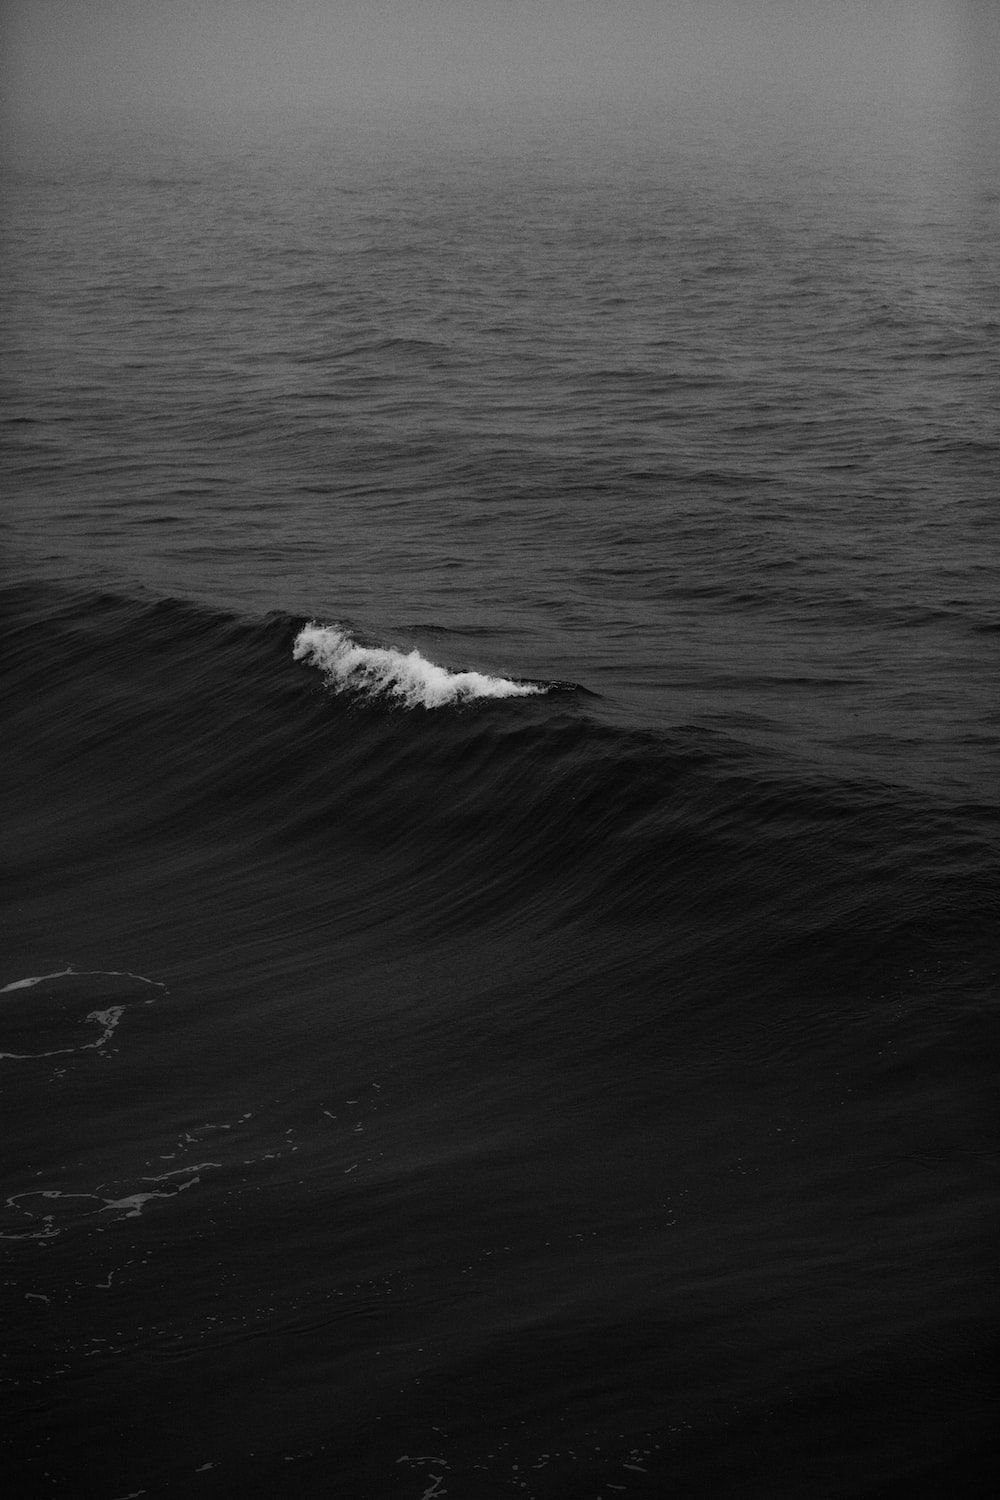 A person is surfing in the ocean - Black, wave